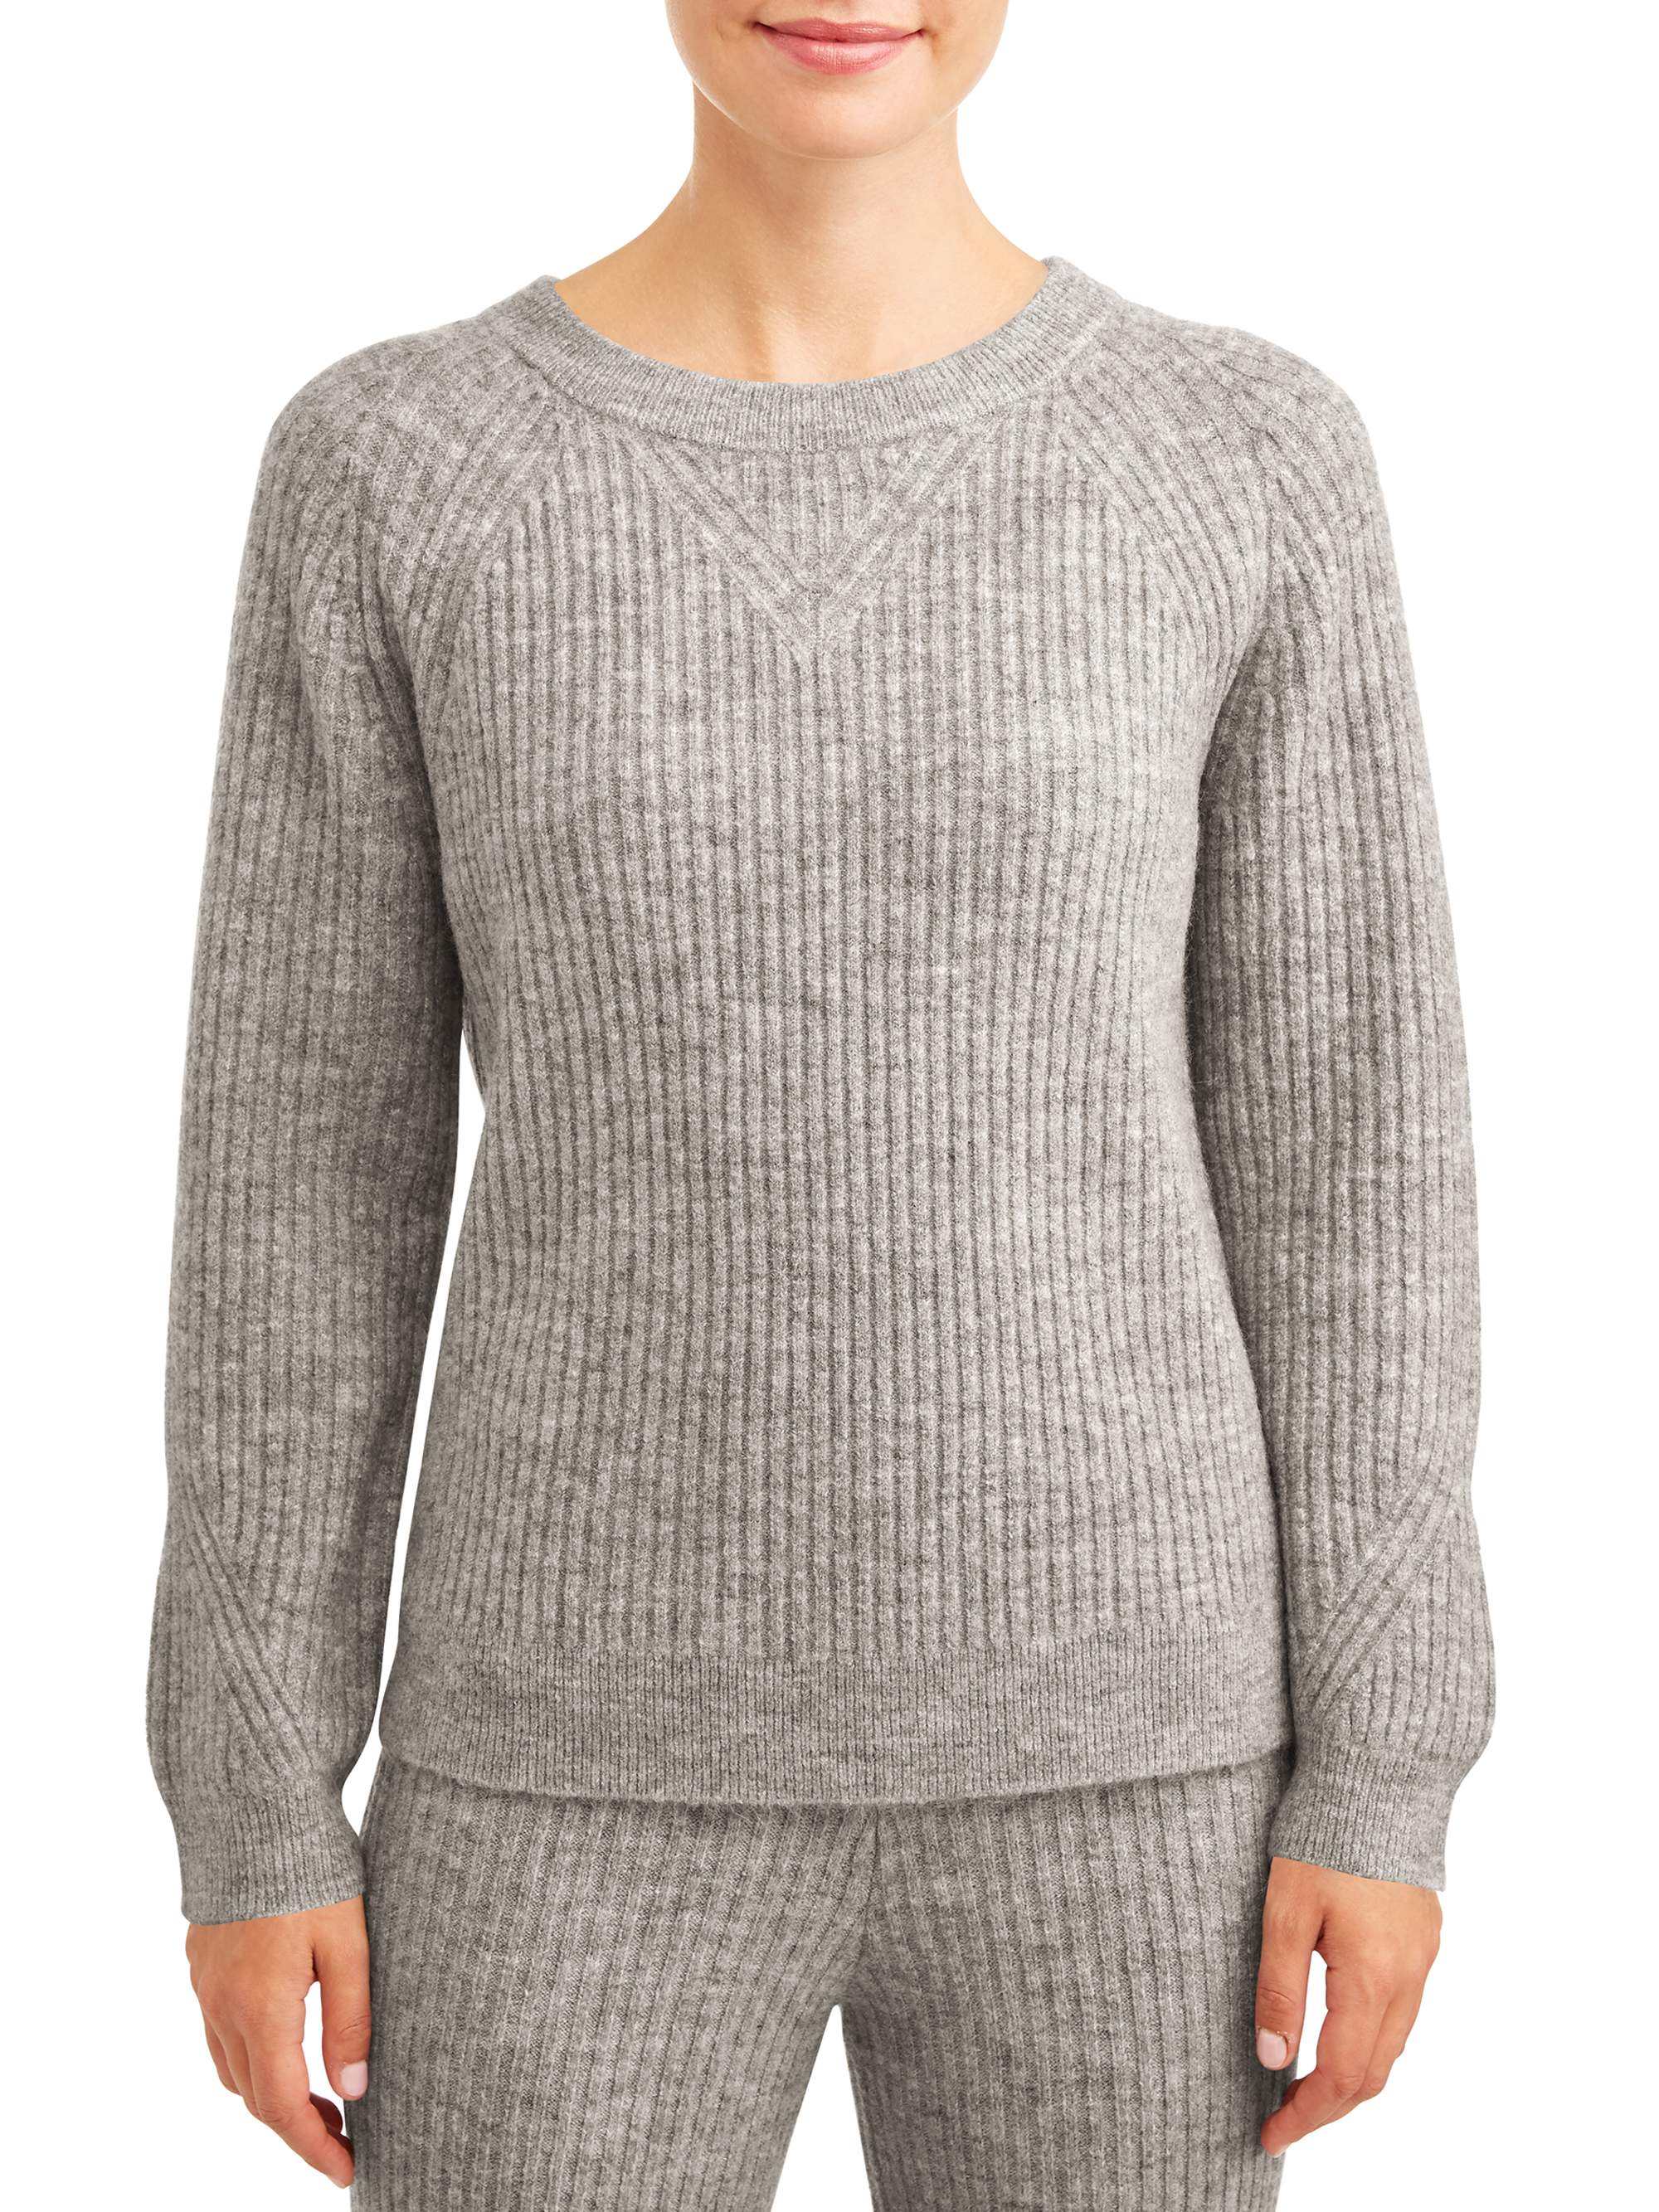 Time and Tru Women's Cozy Ribbed Sweater - image 1 of 5